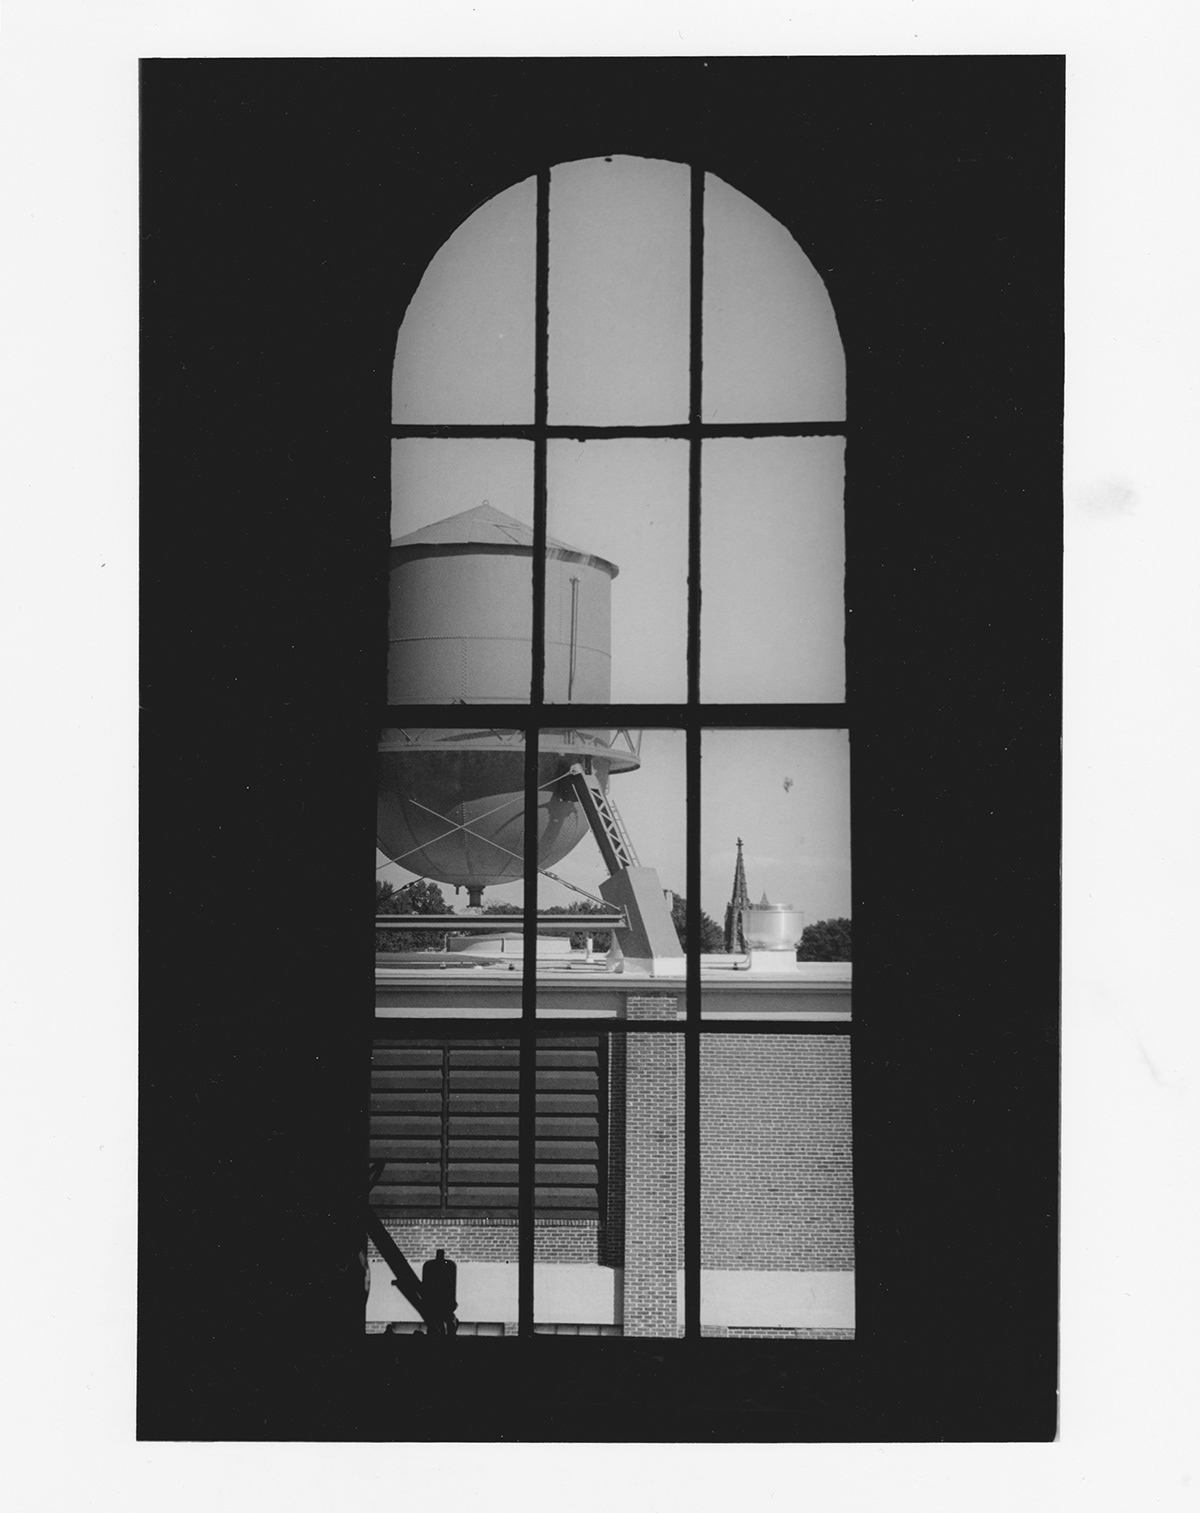 35mm black and white landscapes social documentary MICA photo digital Architecture Photography Interior Spaces